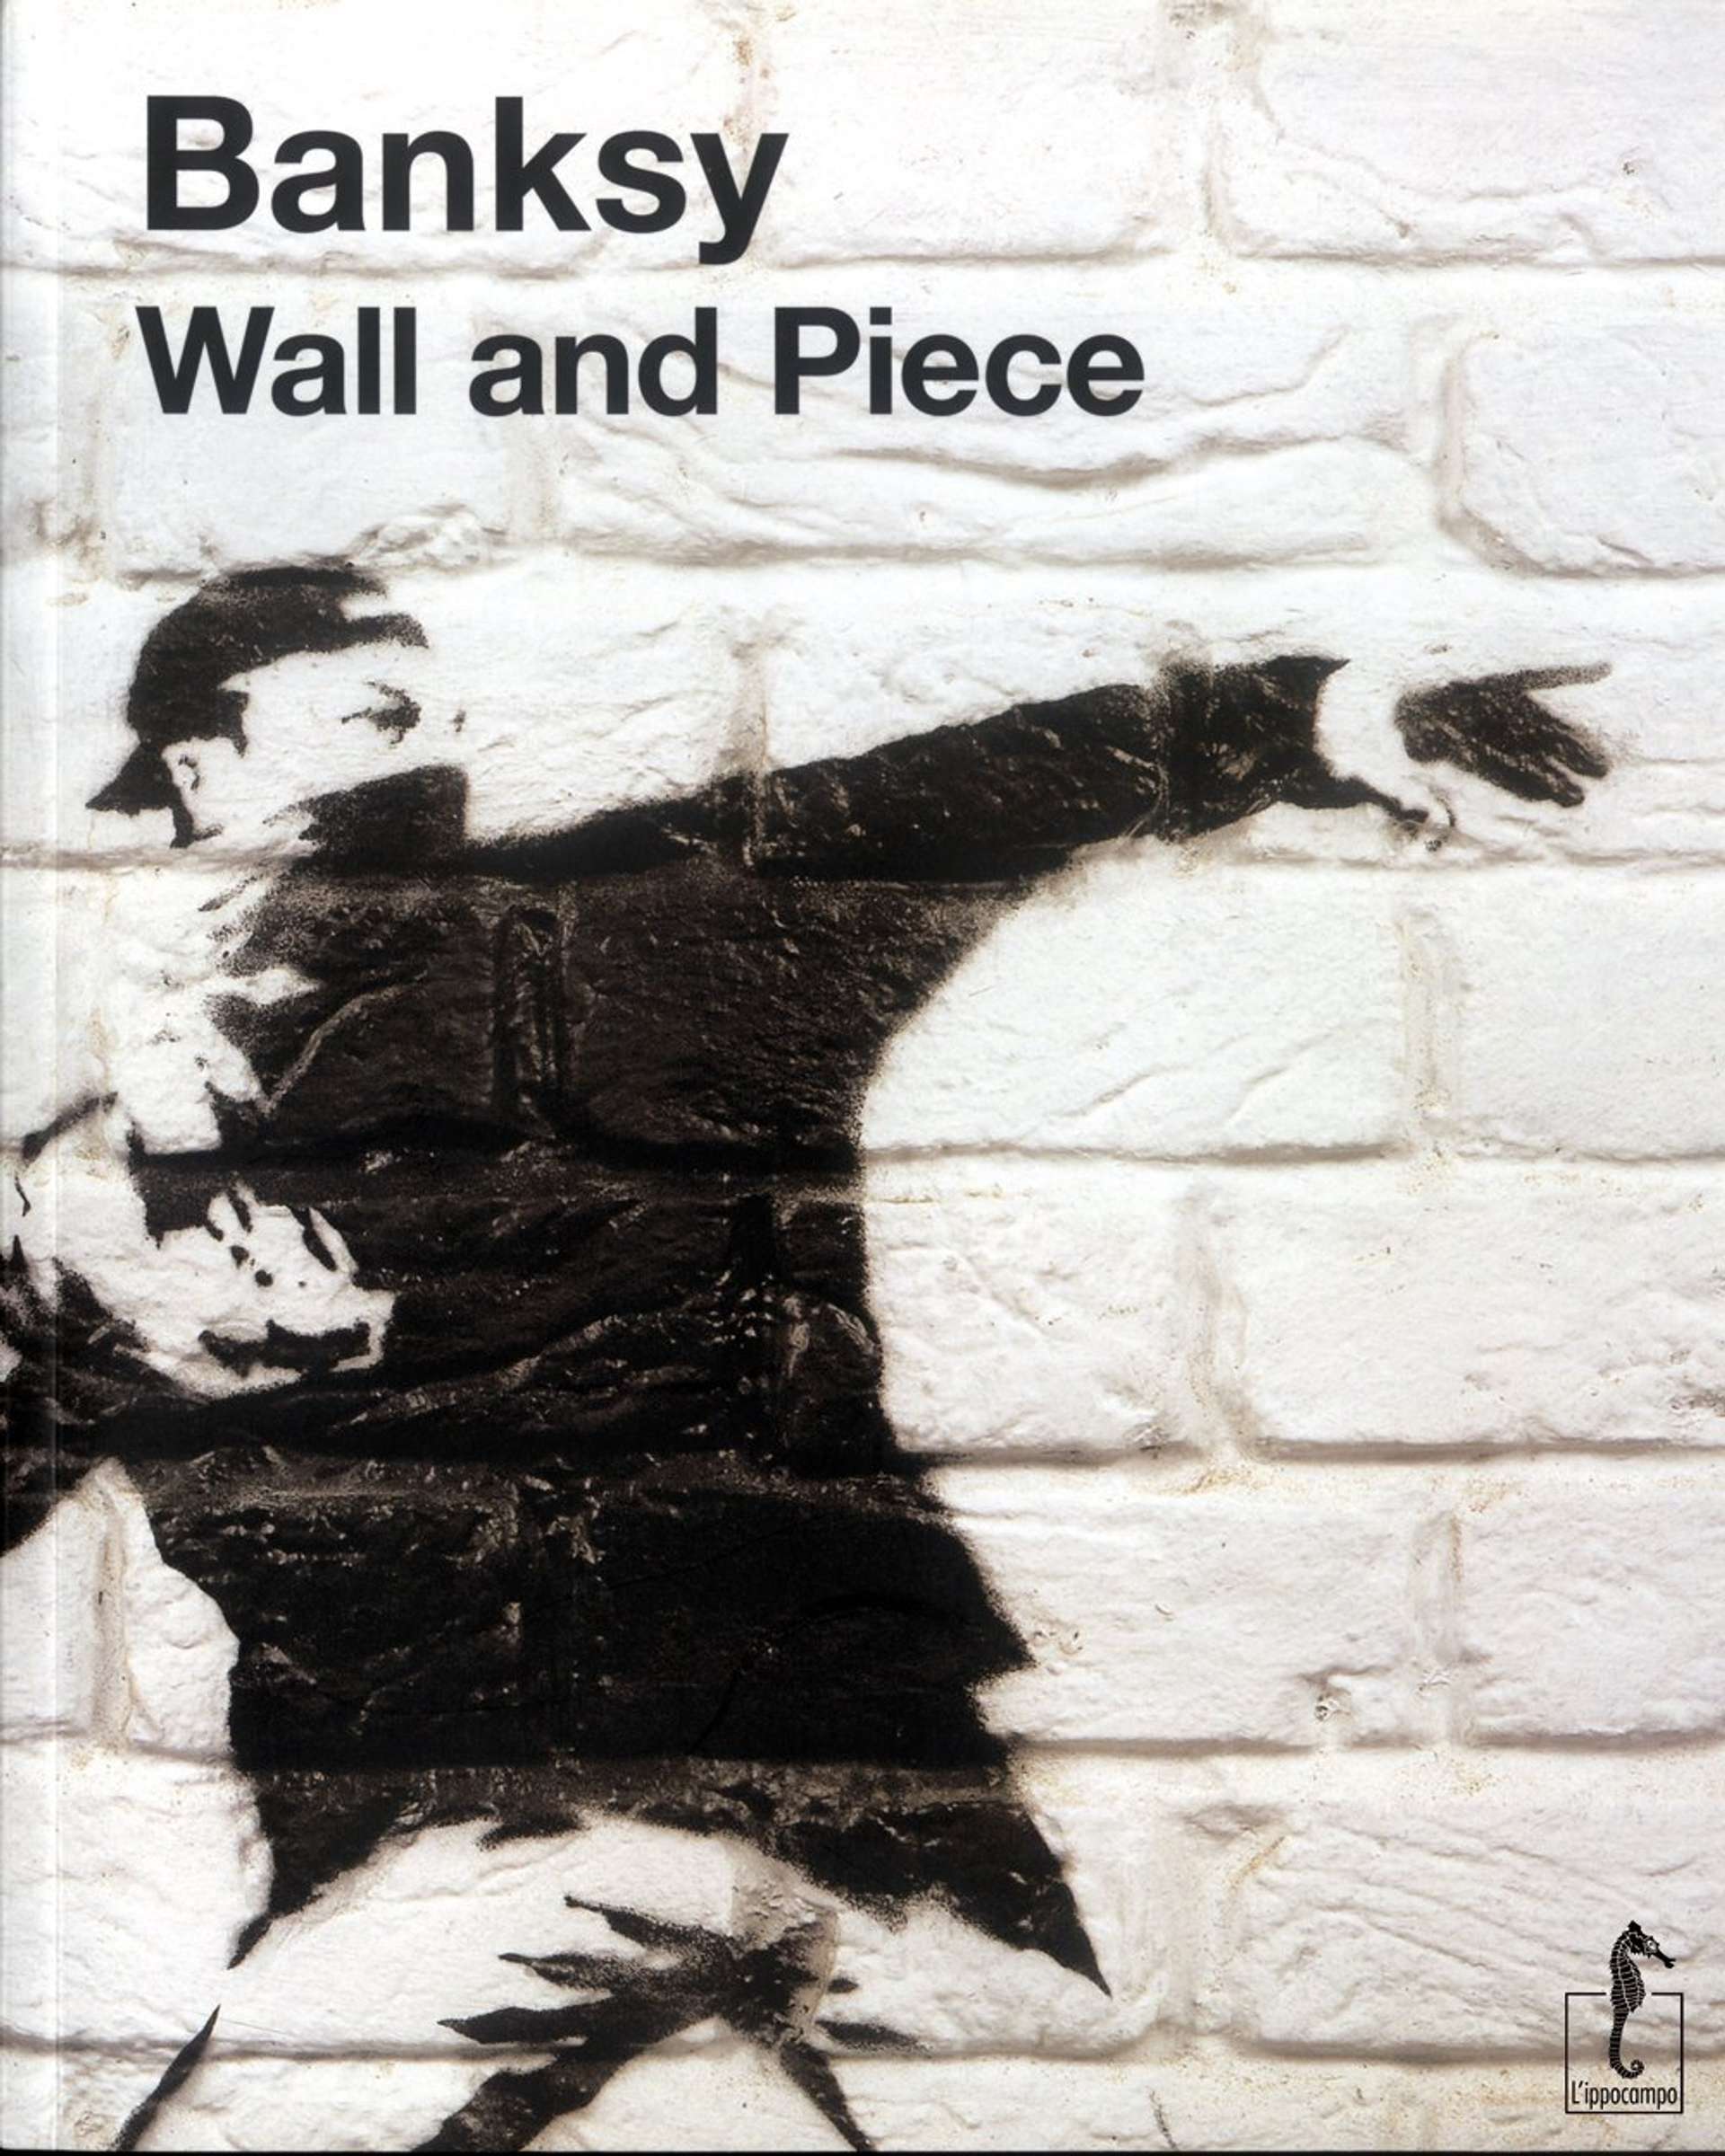 Banksy's Wall and Piece